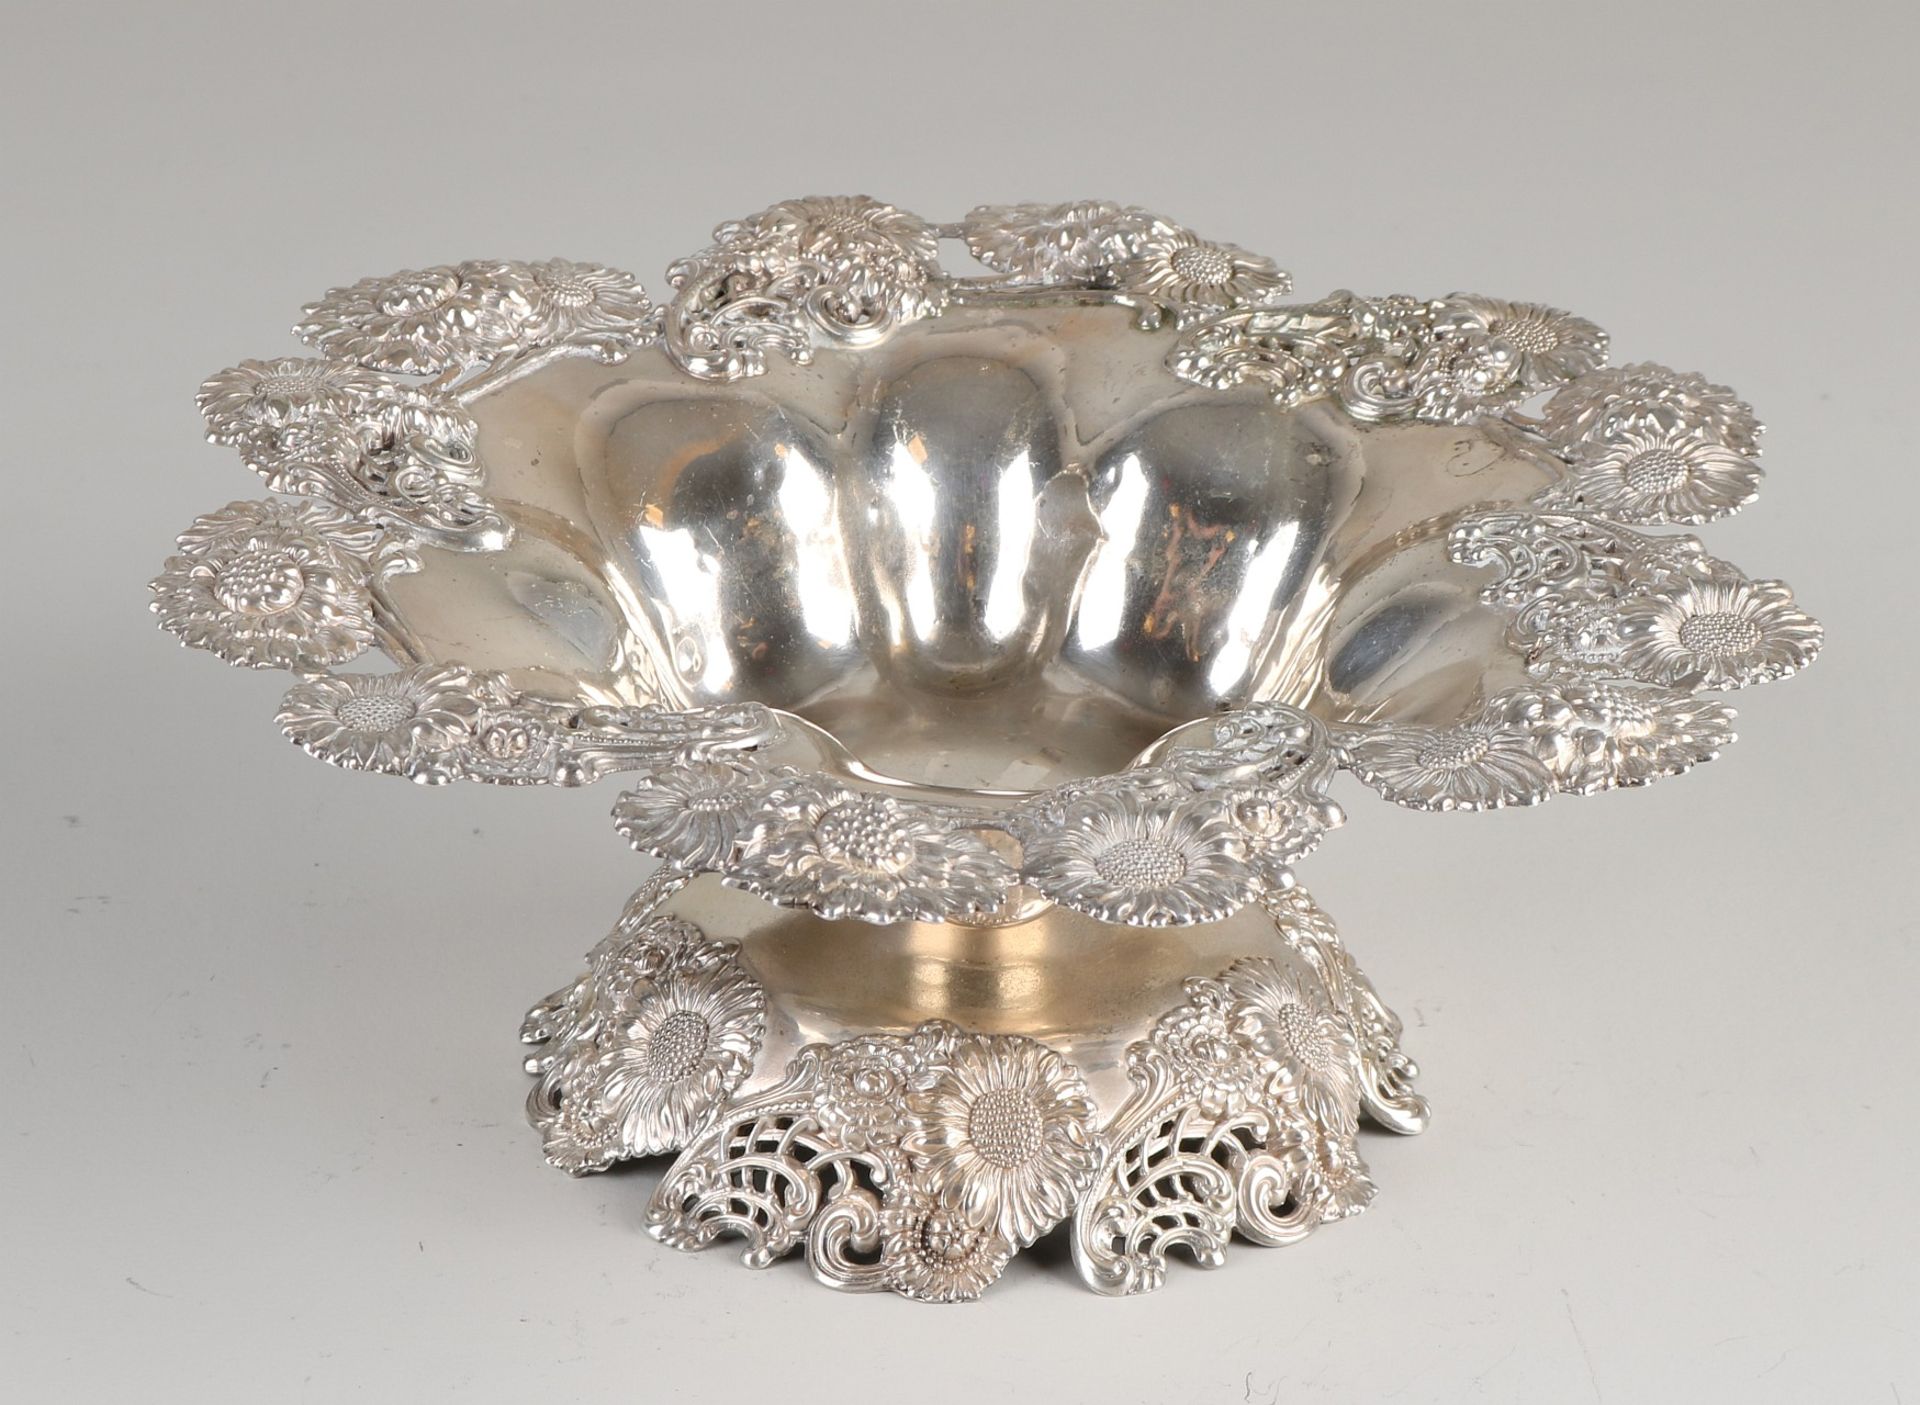 Silver table bowl